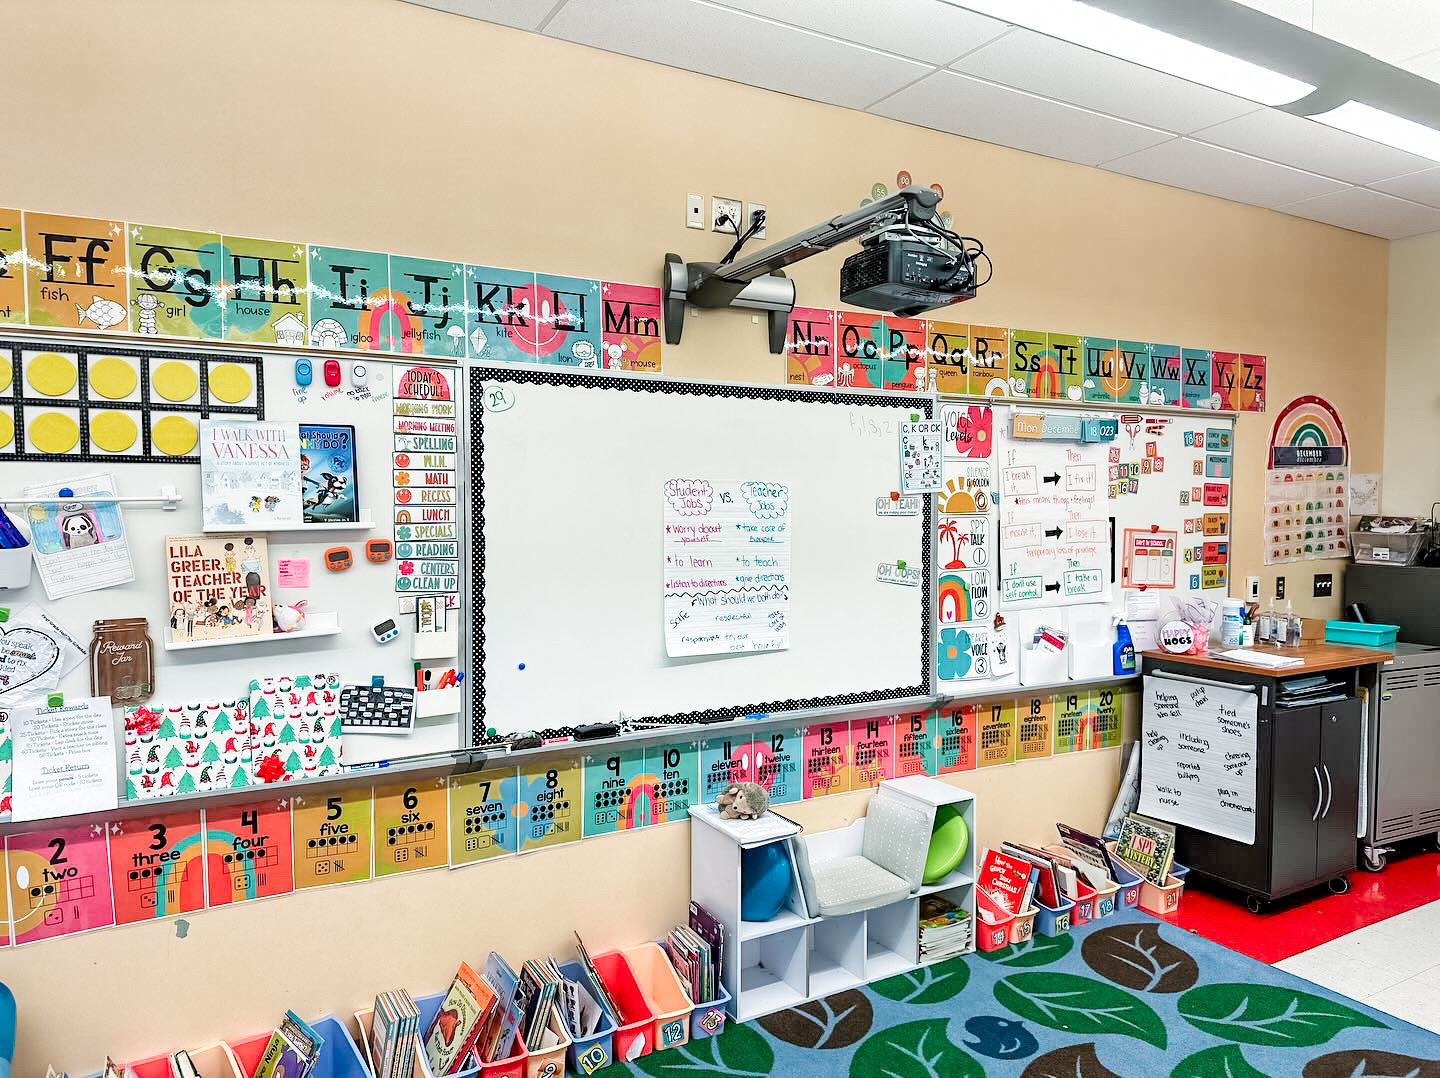 This image shows a view of a whiteboard in a classroom. There are brightly colored alphabet posters above the whiteboard and number posters beneath. 